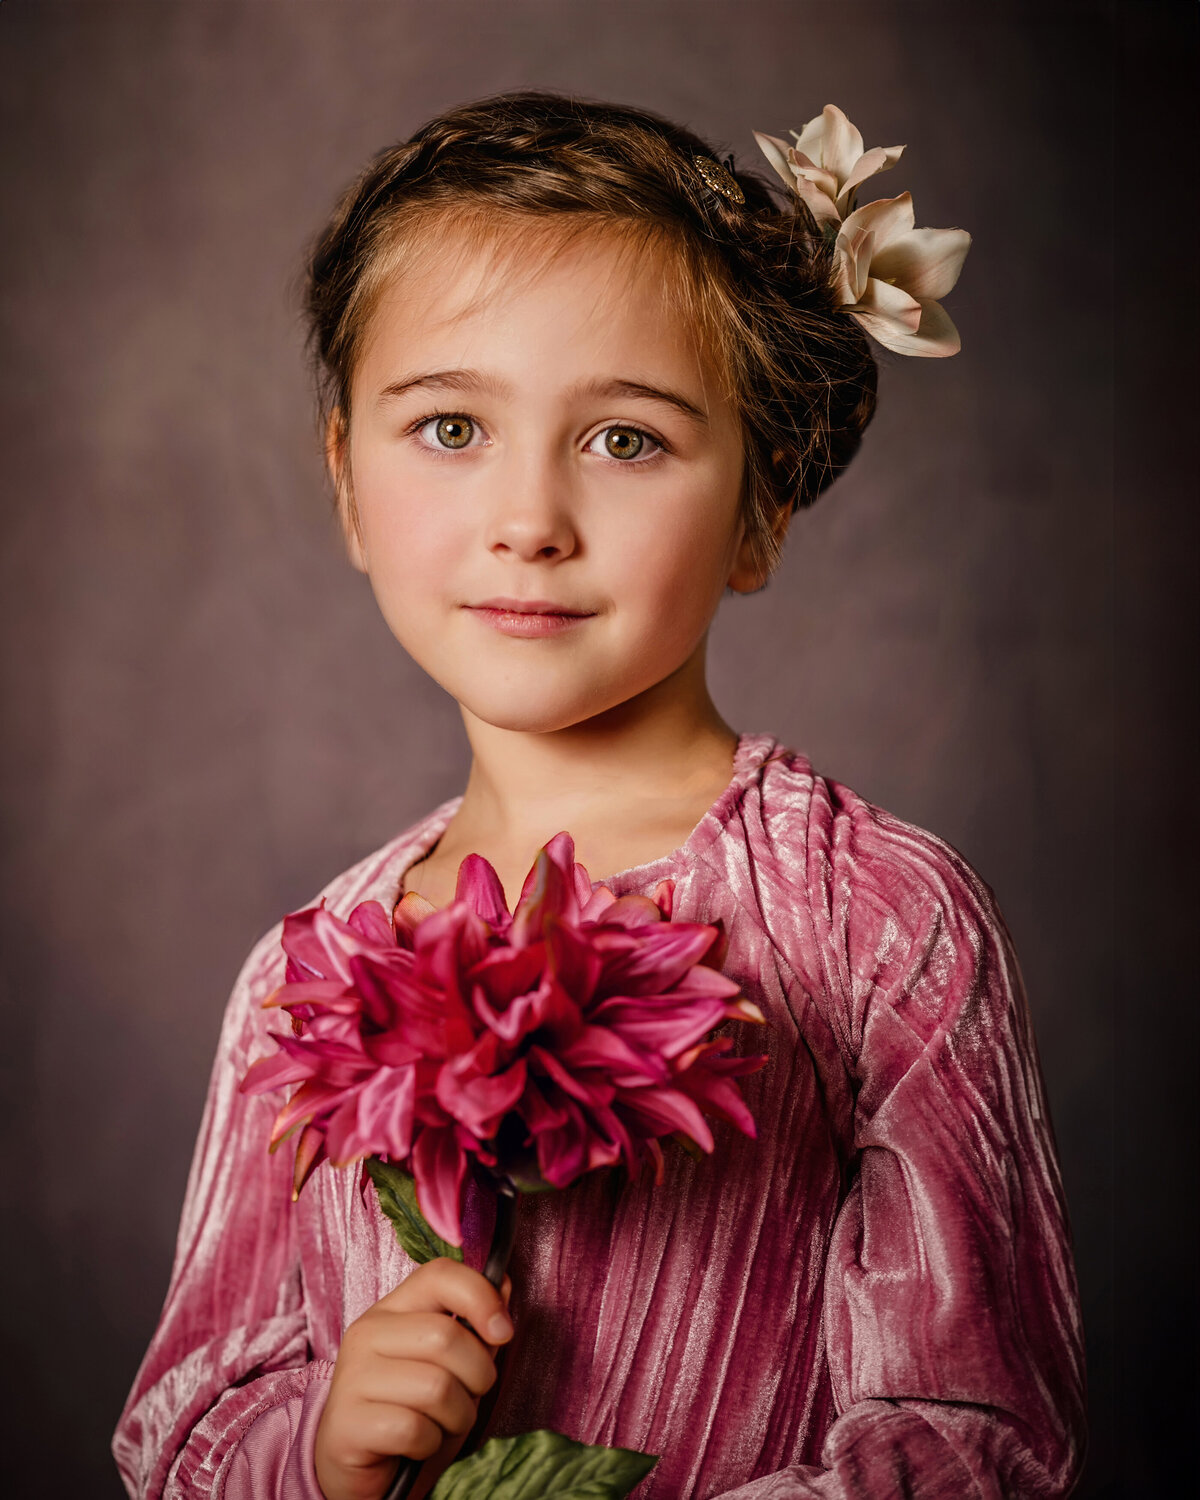 Five-year-old-girl-portrait